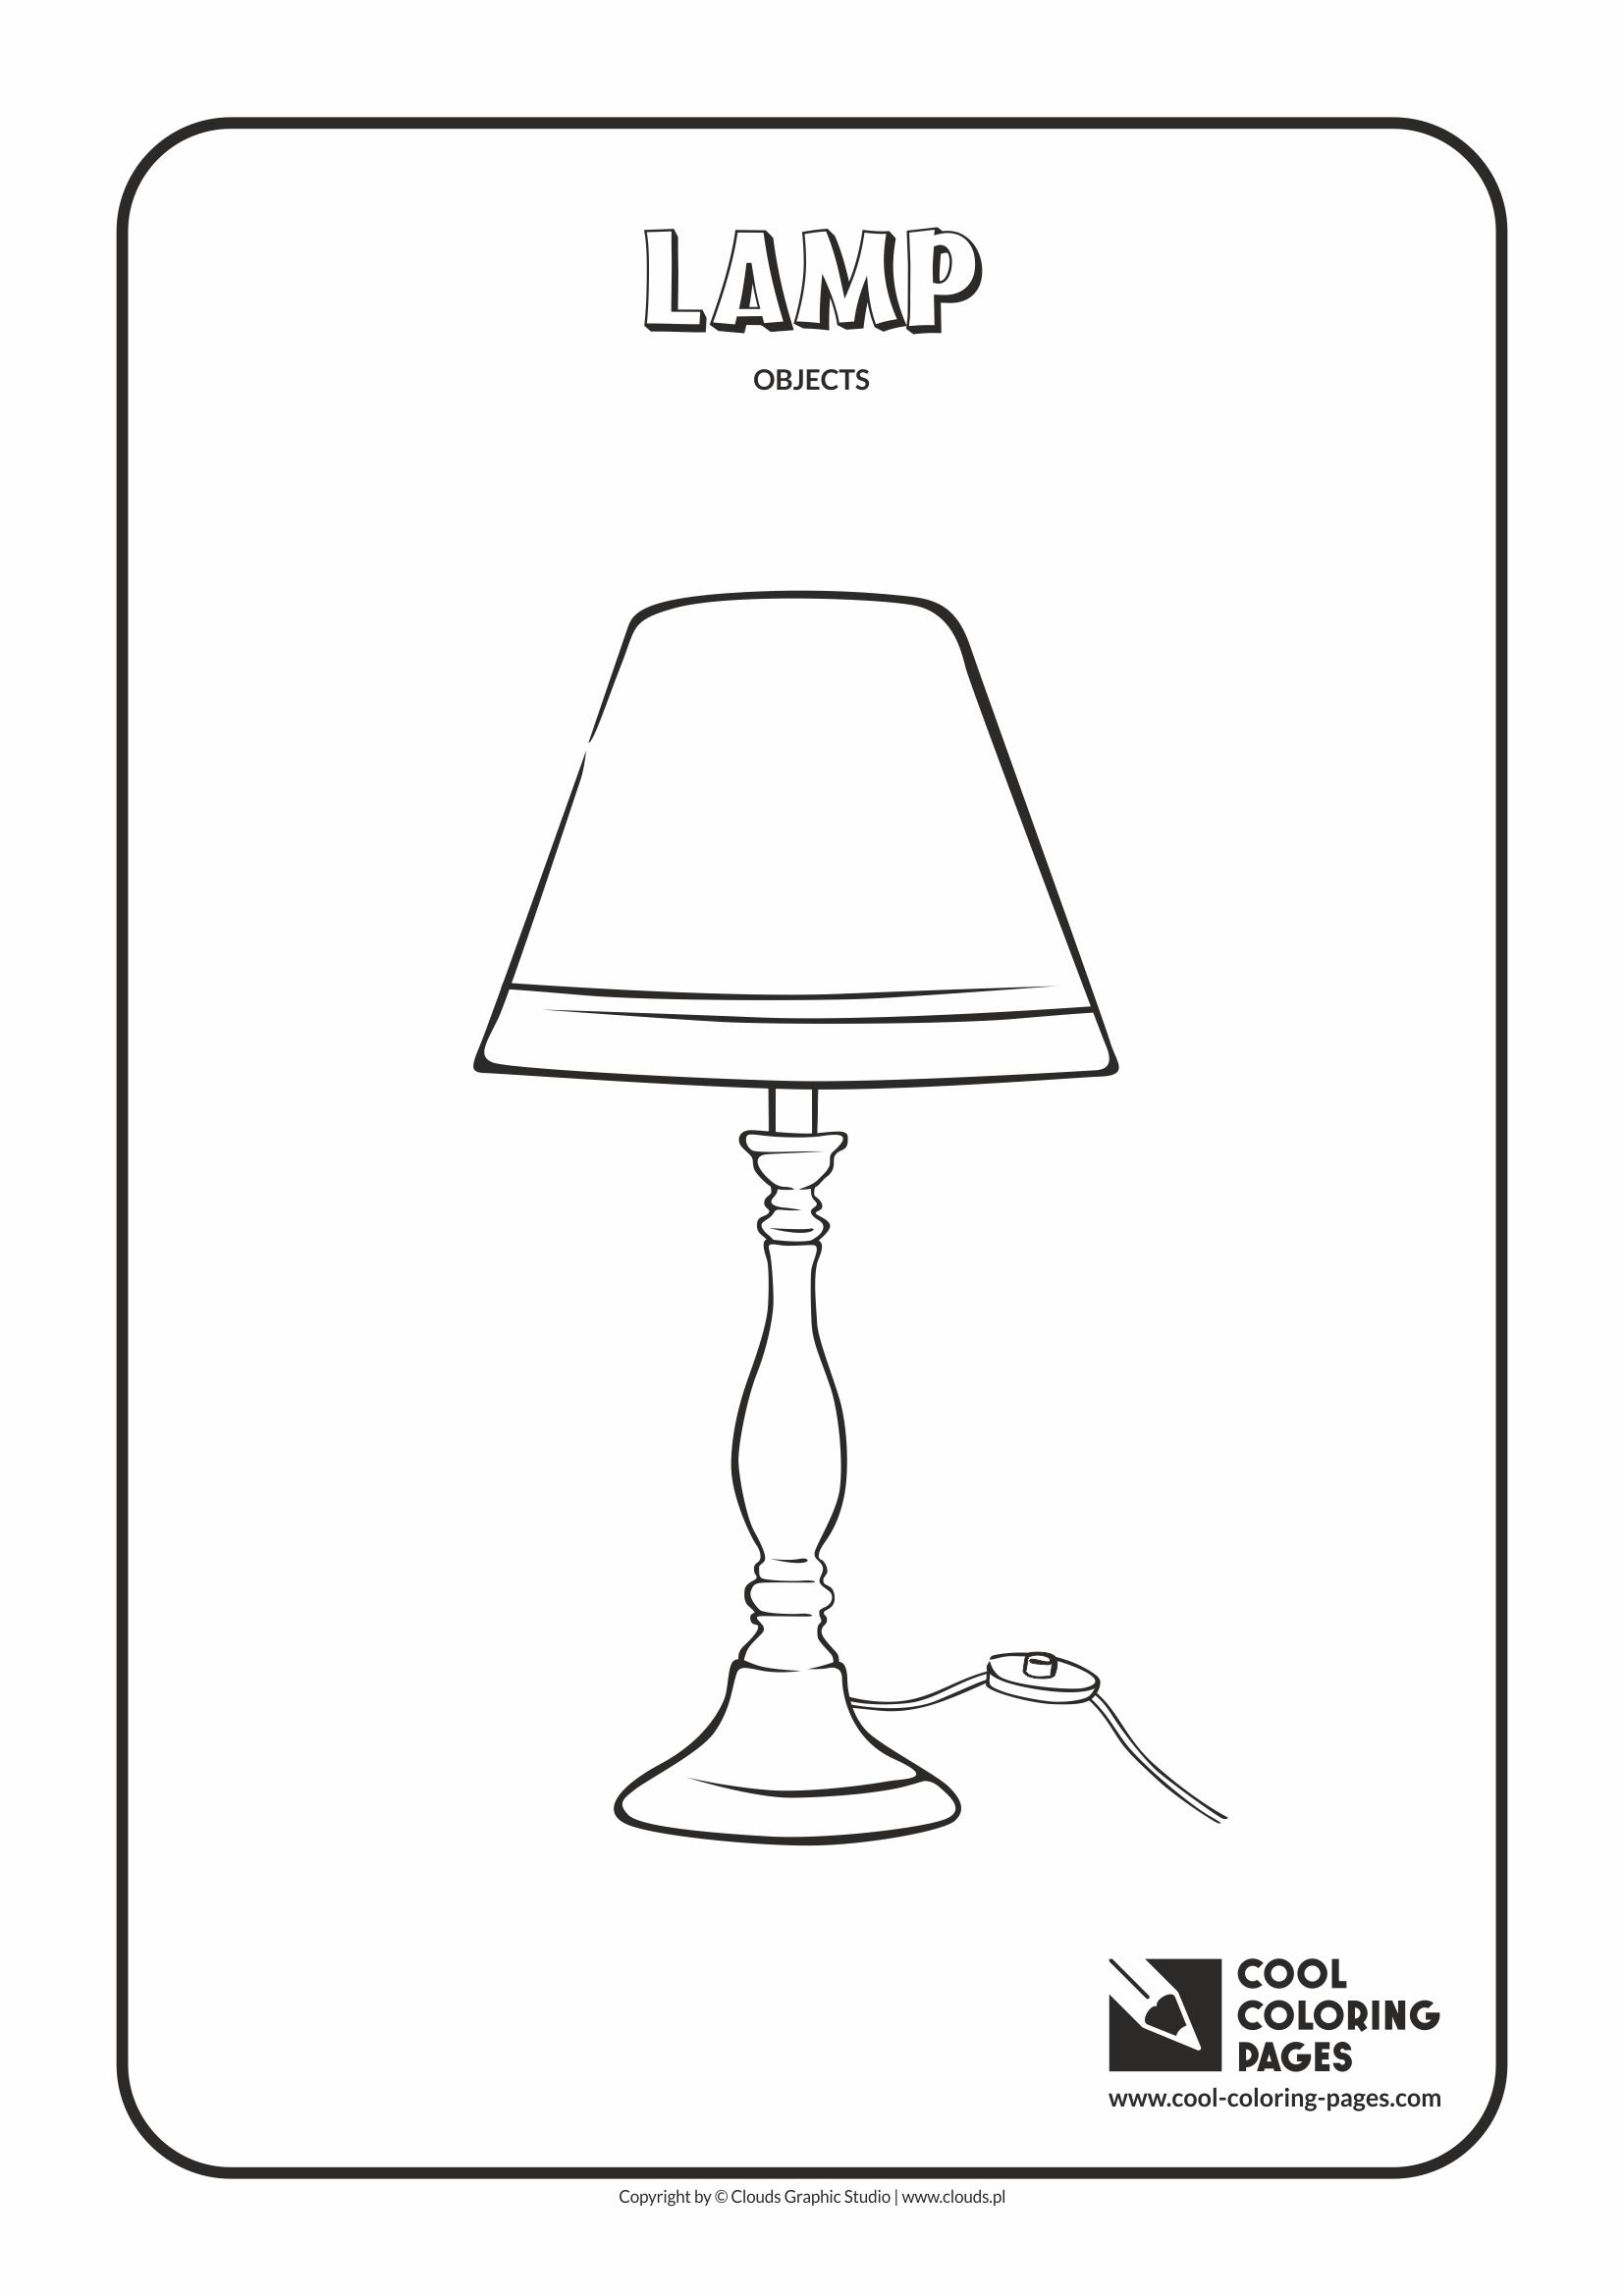 Cool Coloring Pages Coloring Objects - Cool Coloring Pages | Free educational coloring ...1654 x 2339